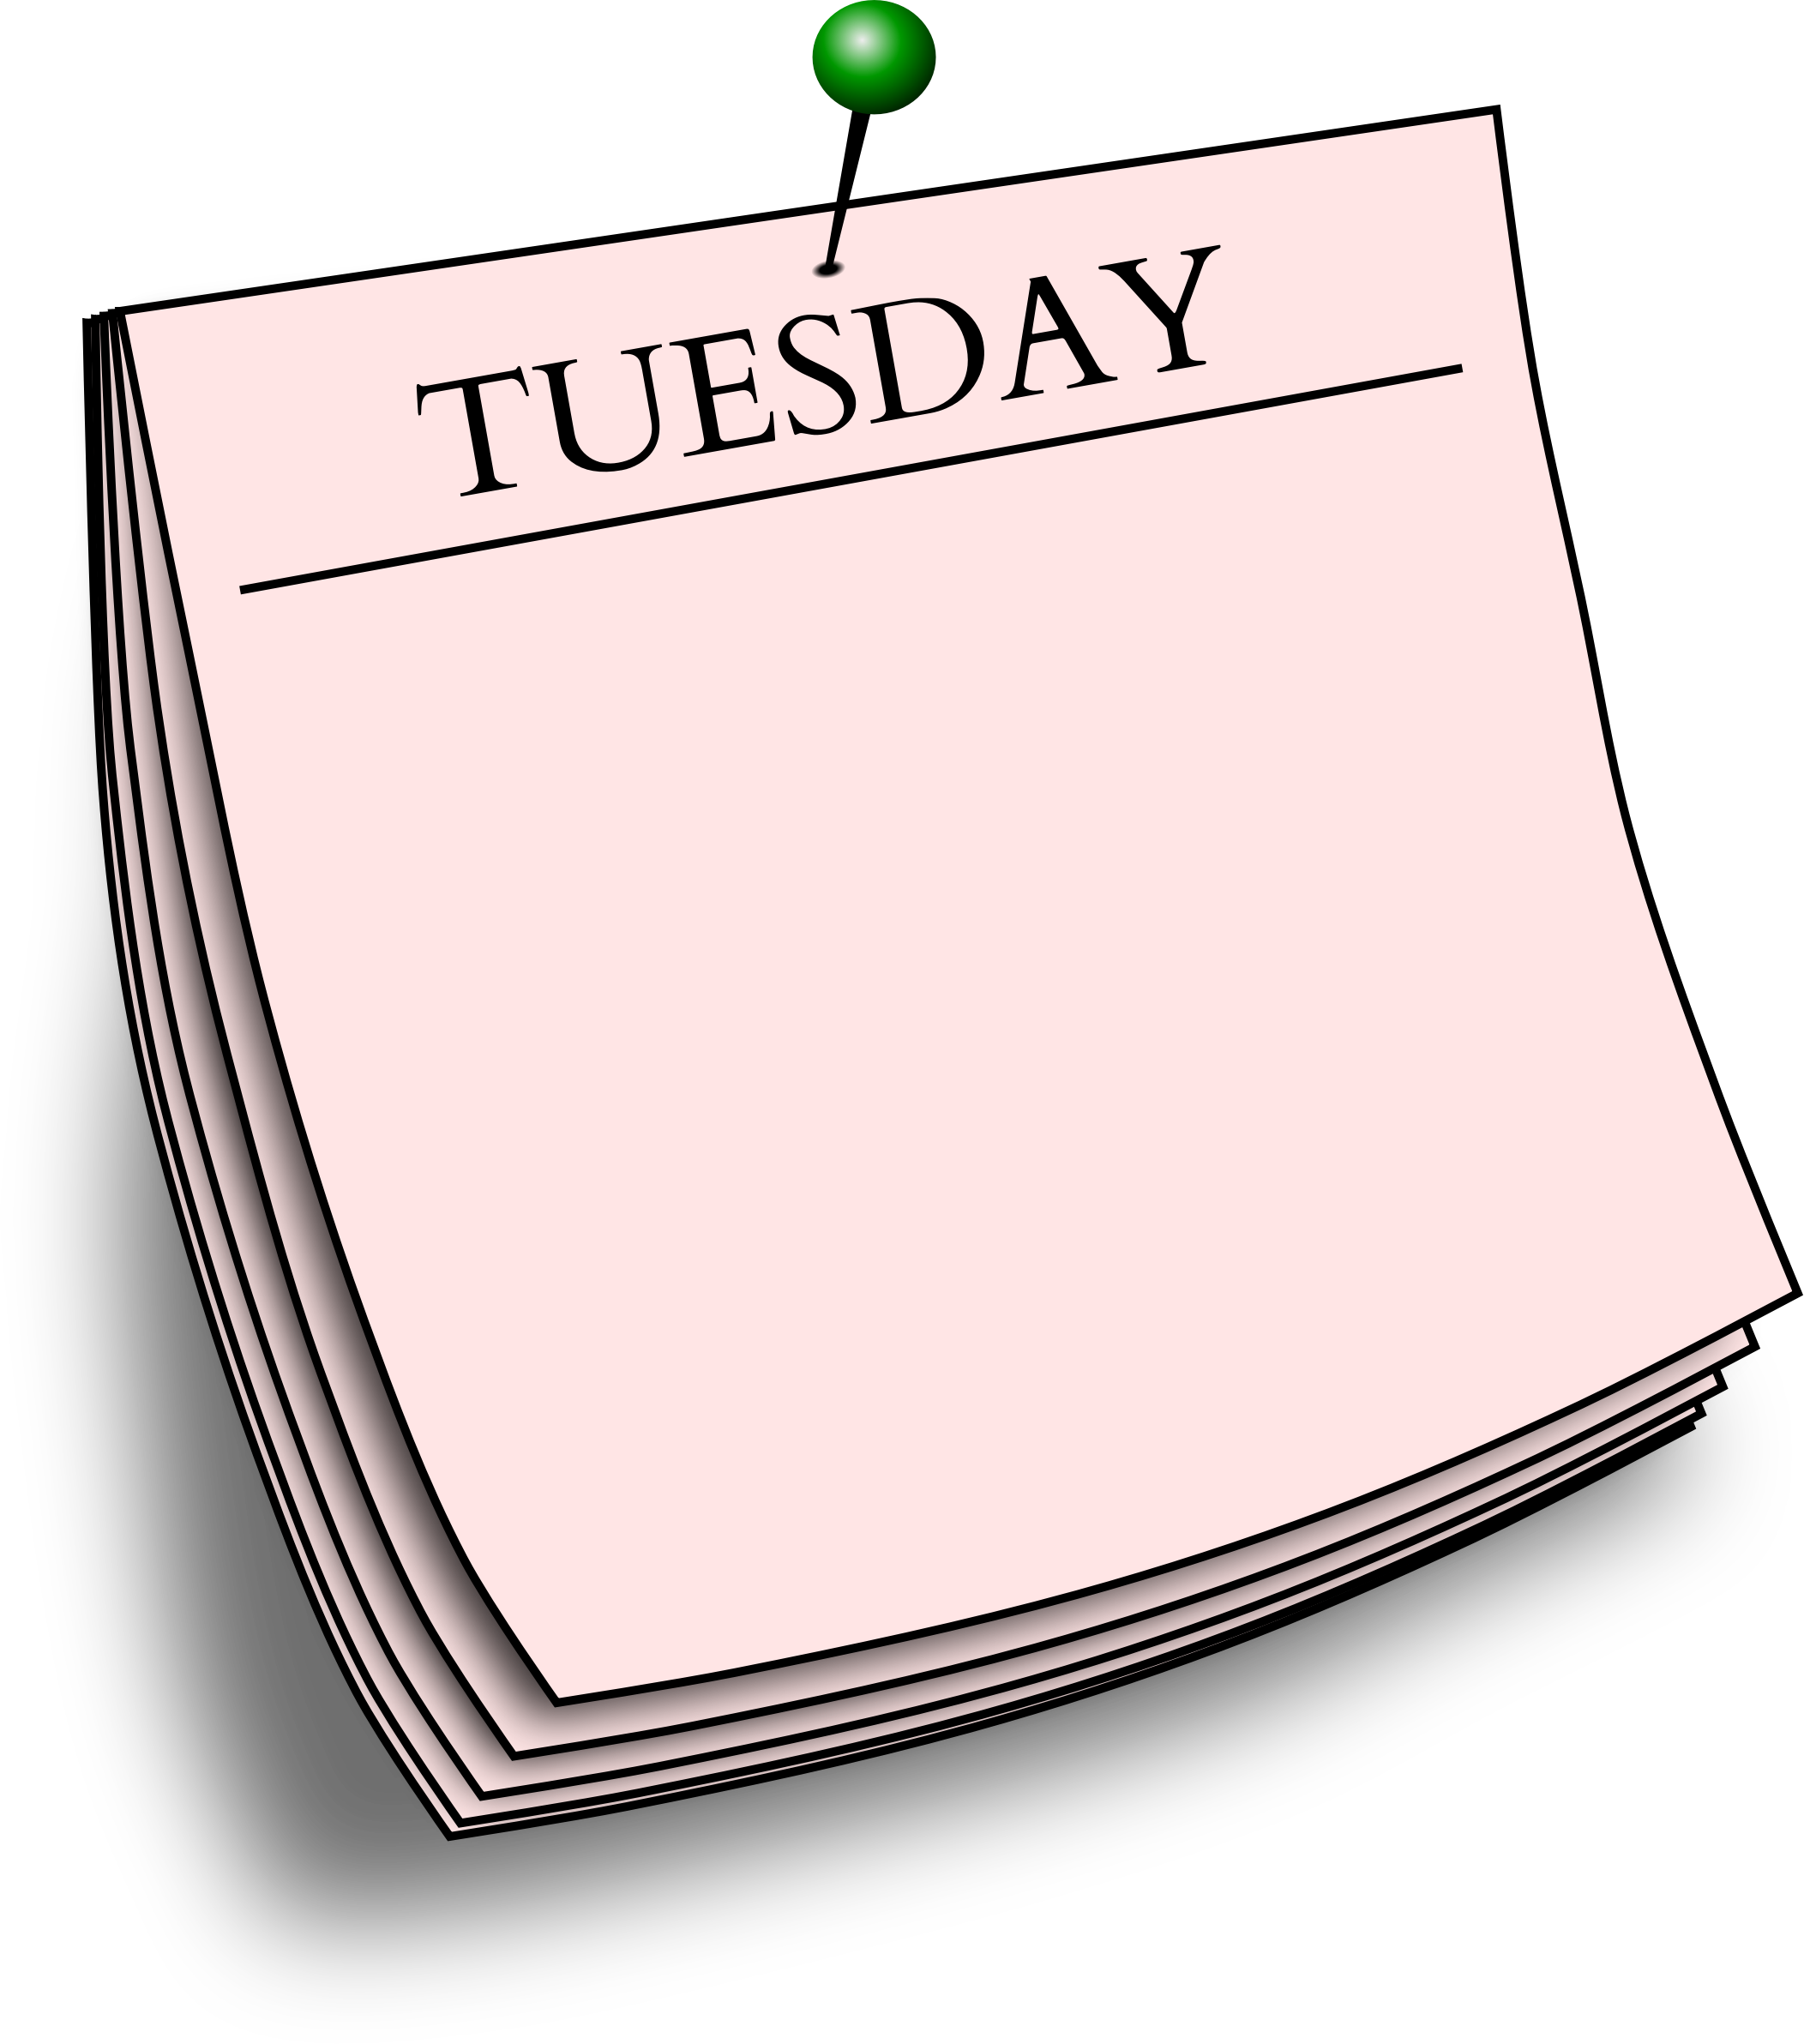 day clipart tuesday